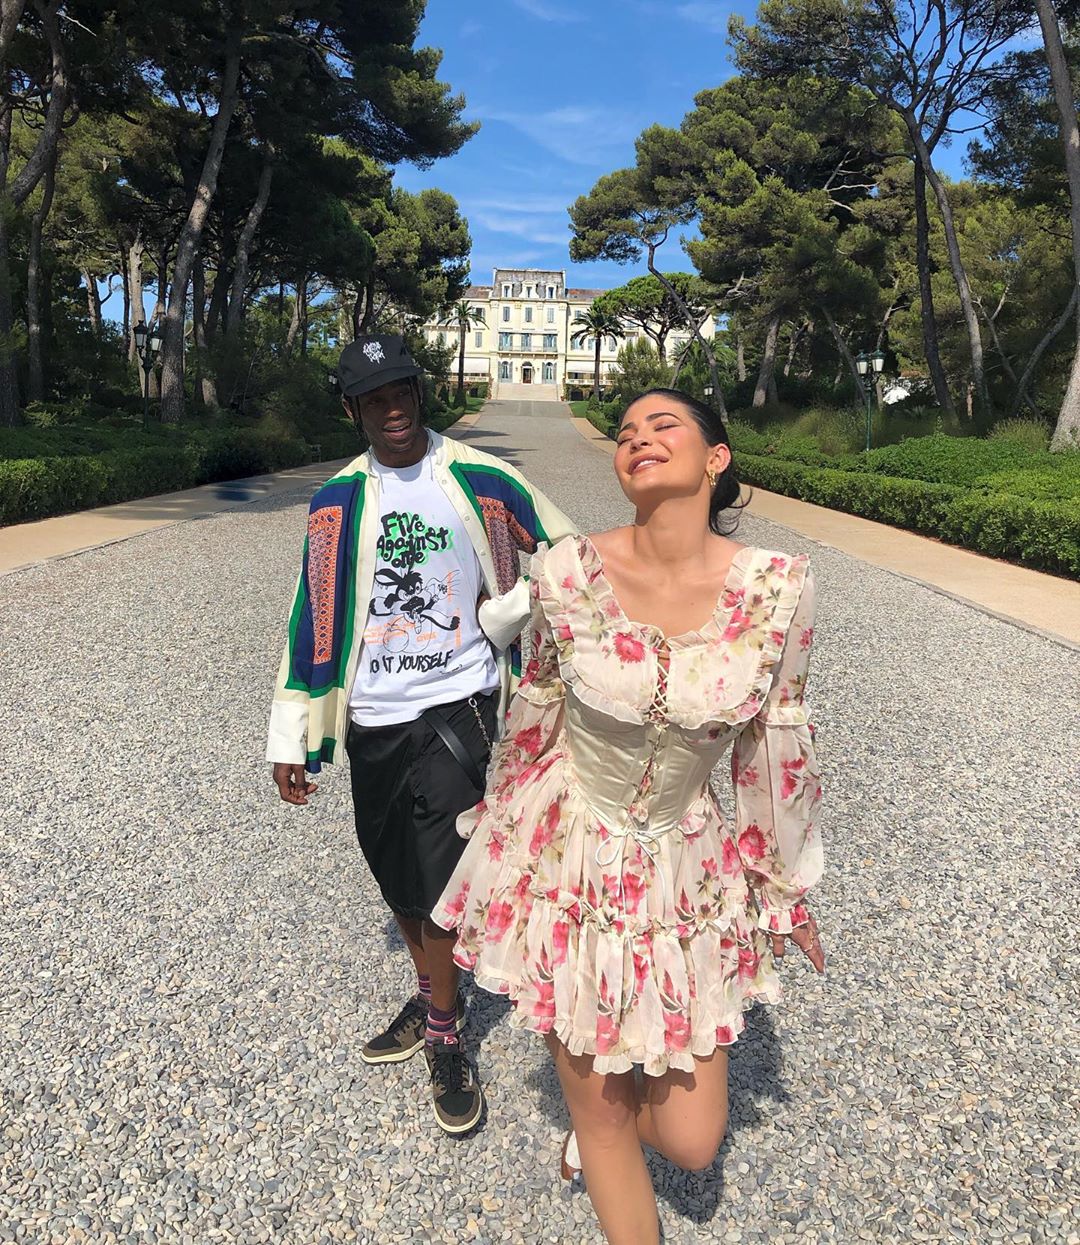 SPOTTED: Kylie Jenner & Travis Scott in South of France